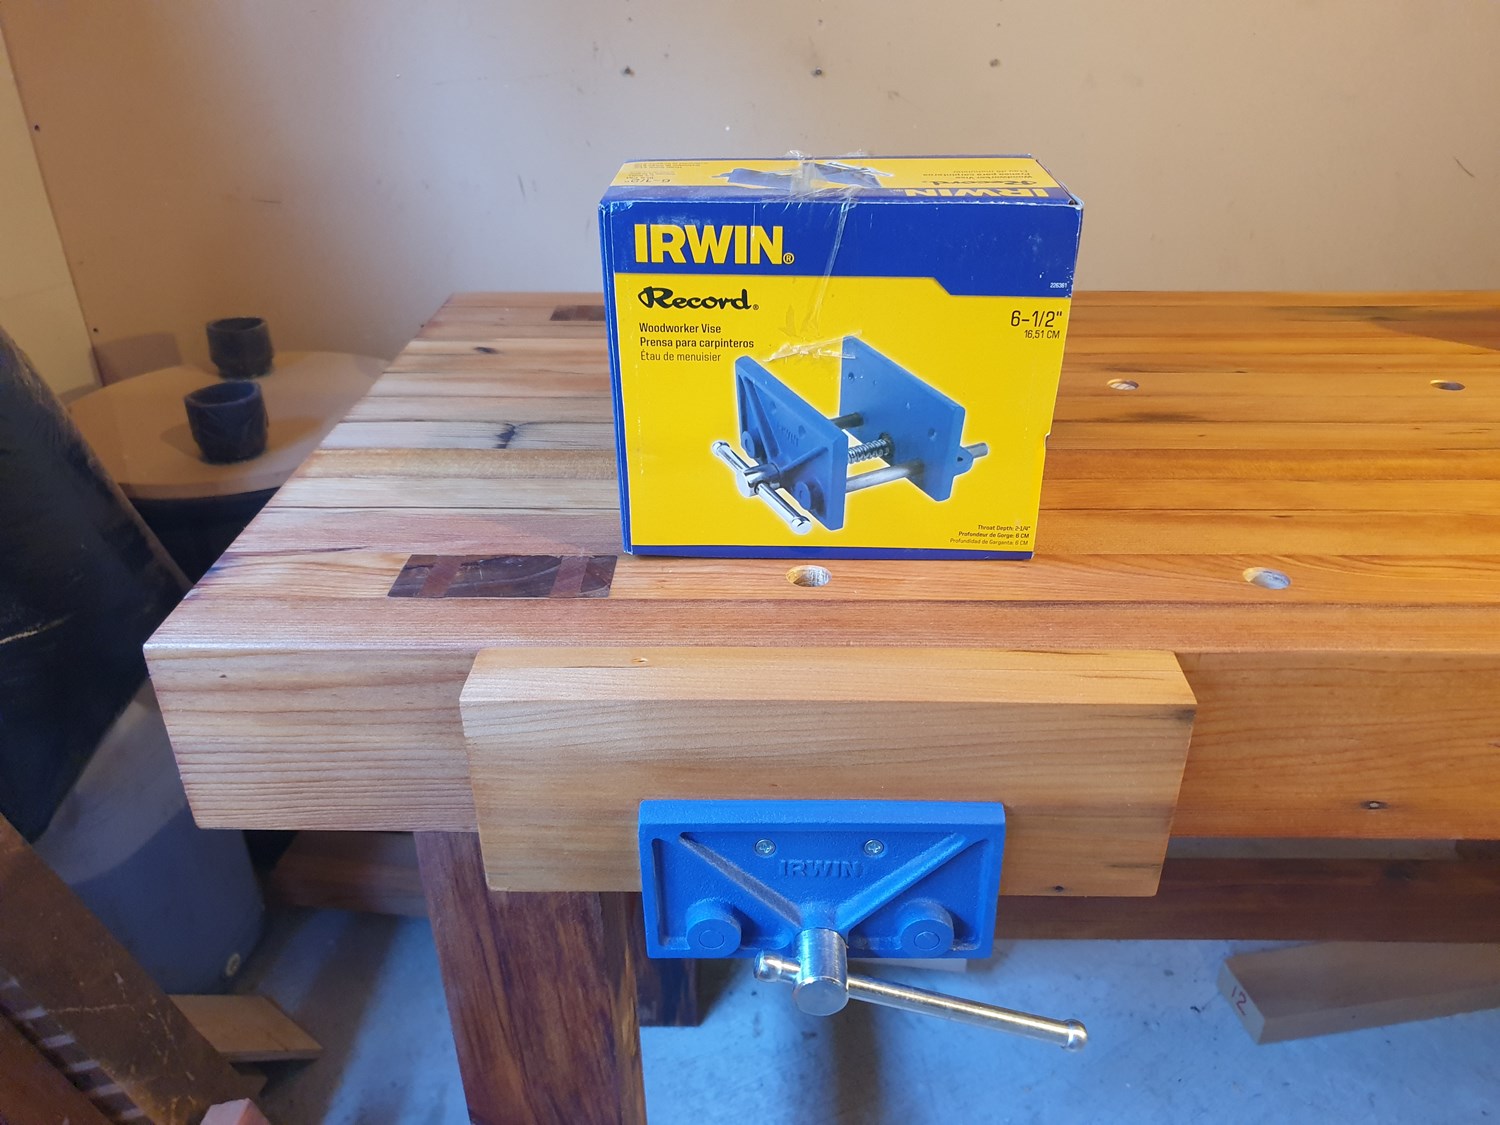 Simplified Roubo Workbench Build Part 6 - Installing Bench Vise and  Drilling Workbench Dog Holes